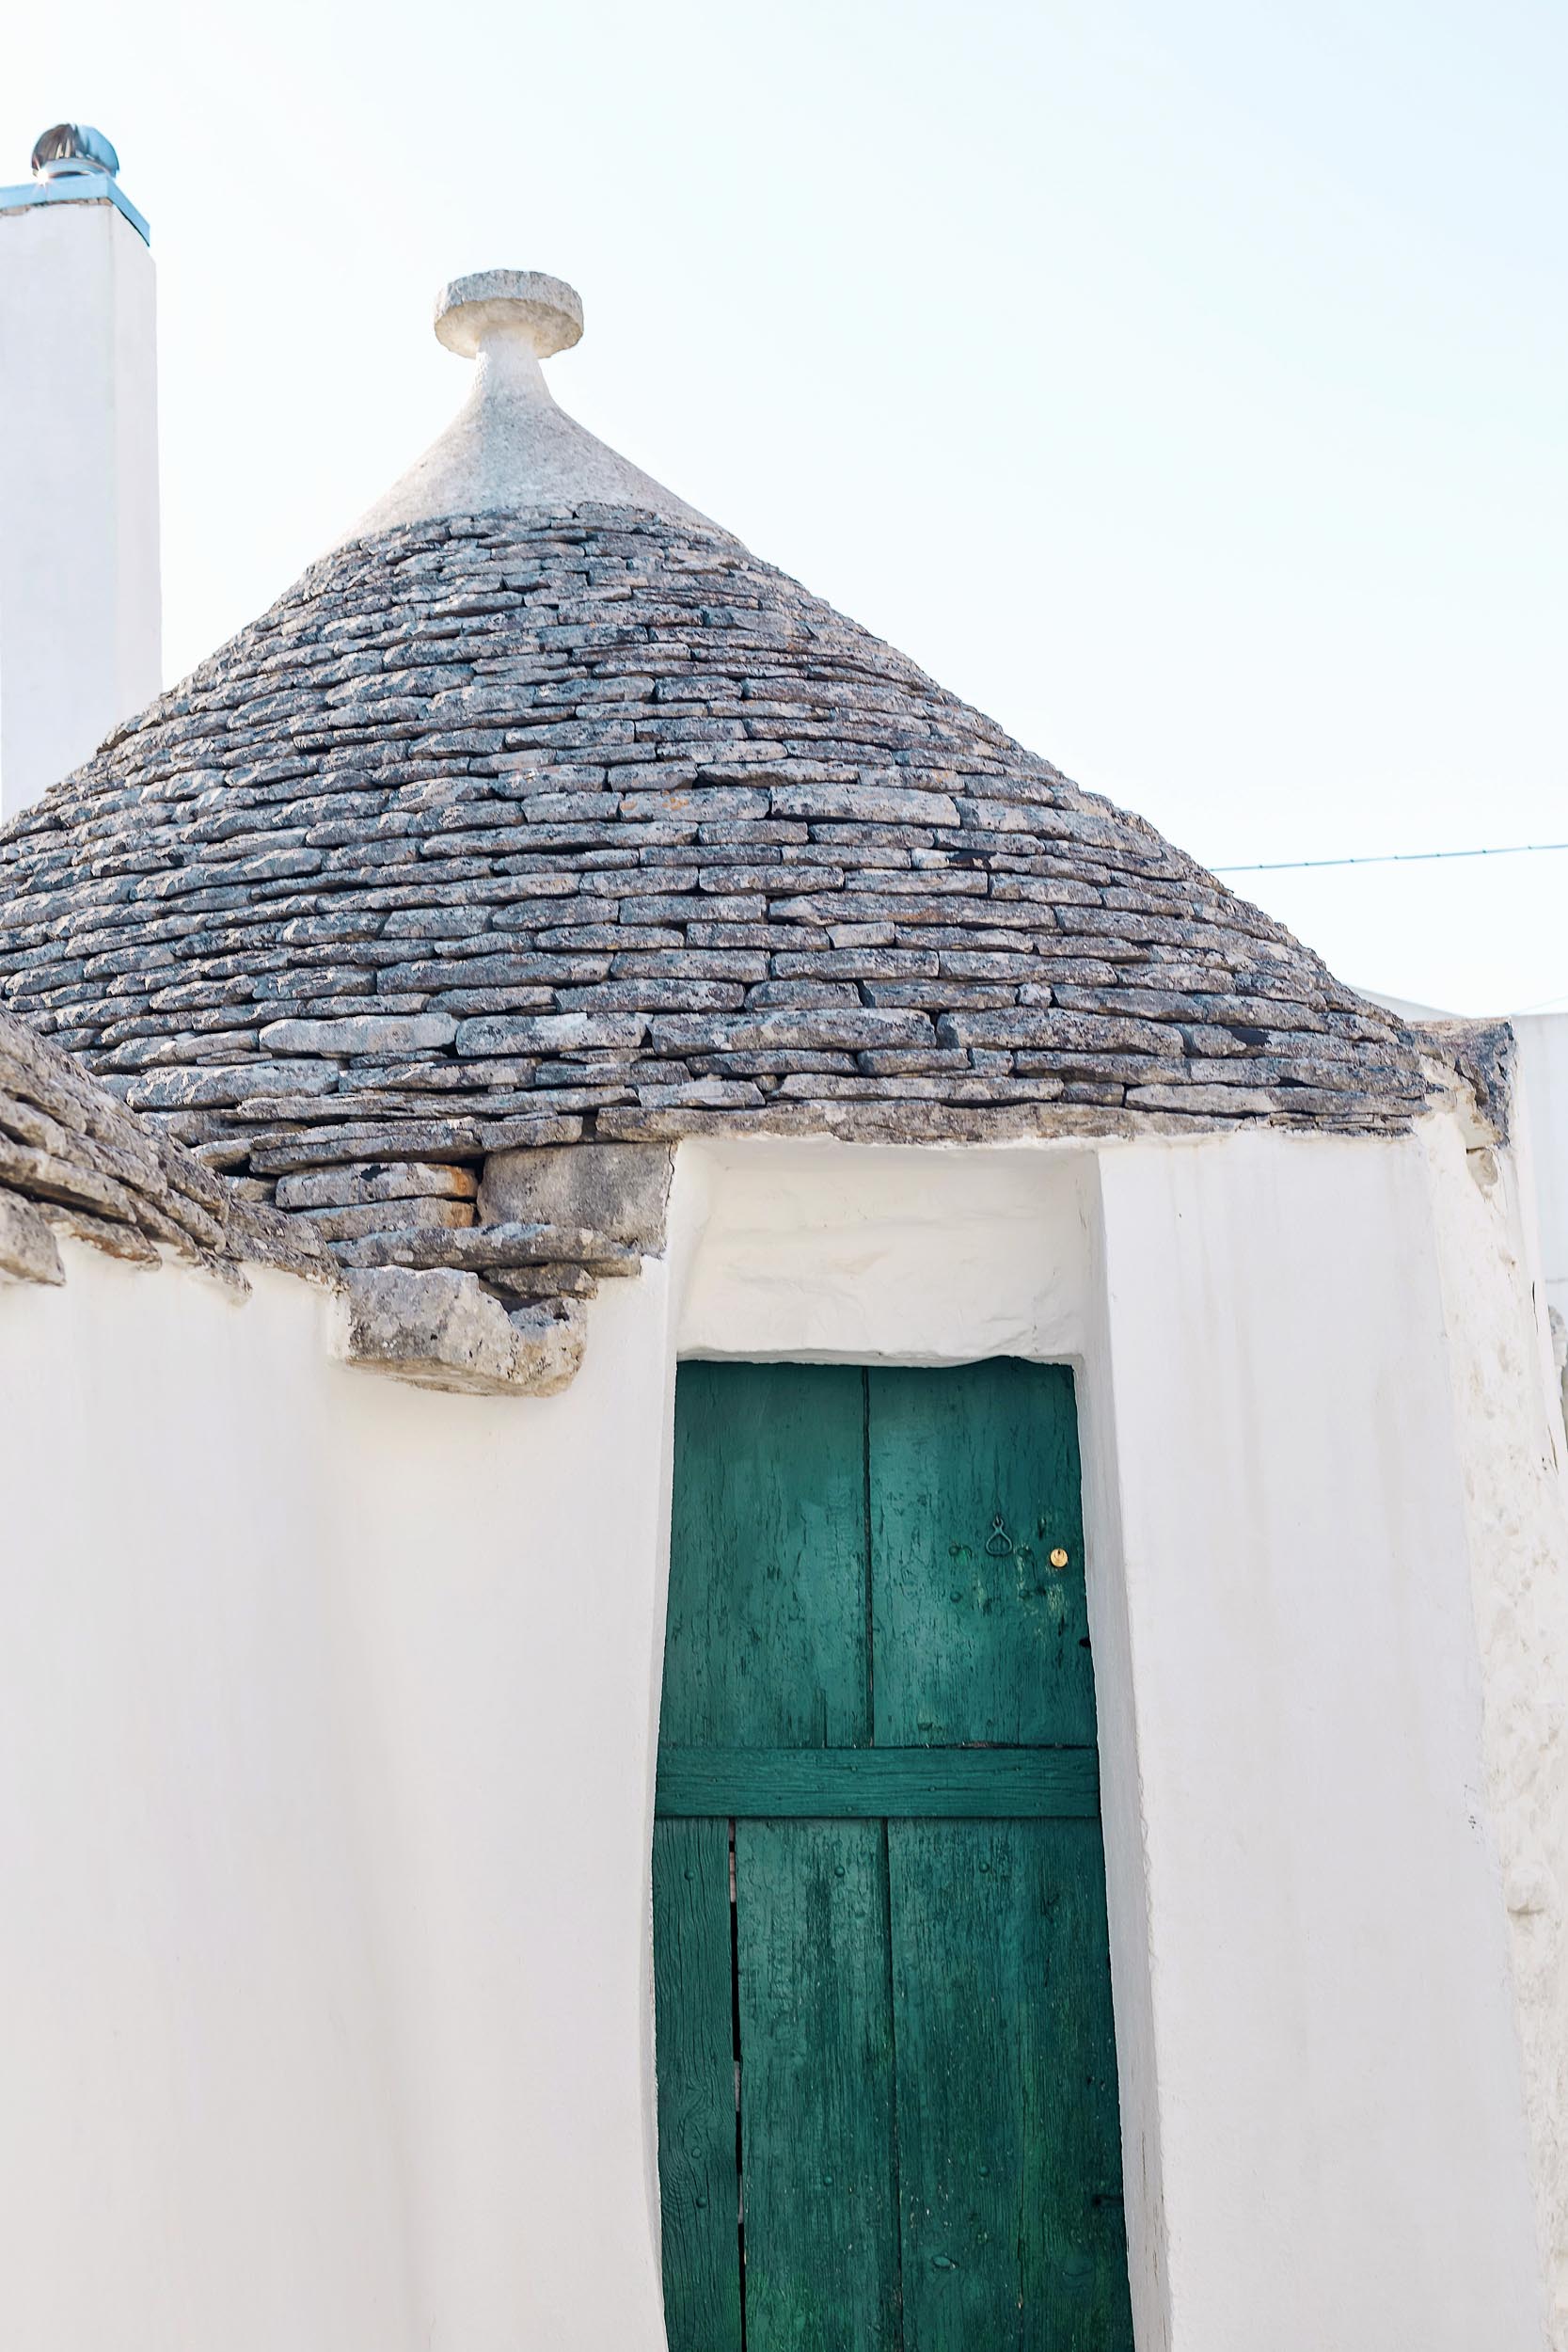 A teal door on a trullo building in Puglia